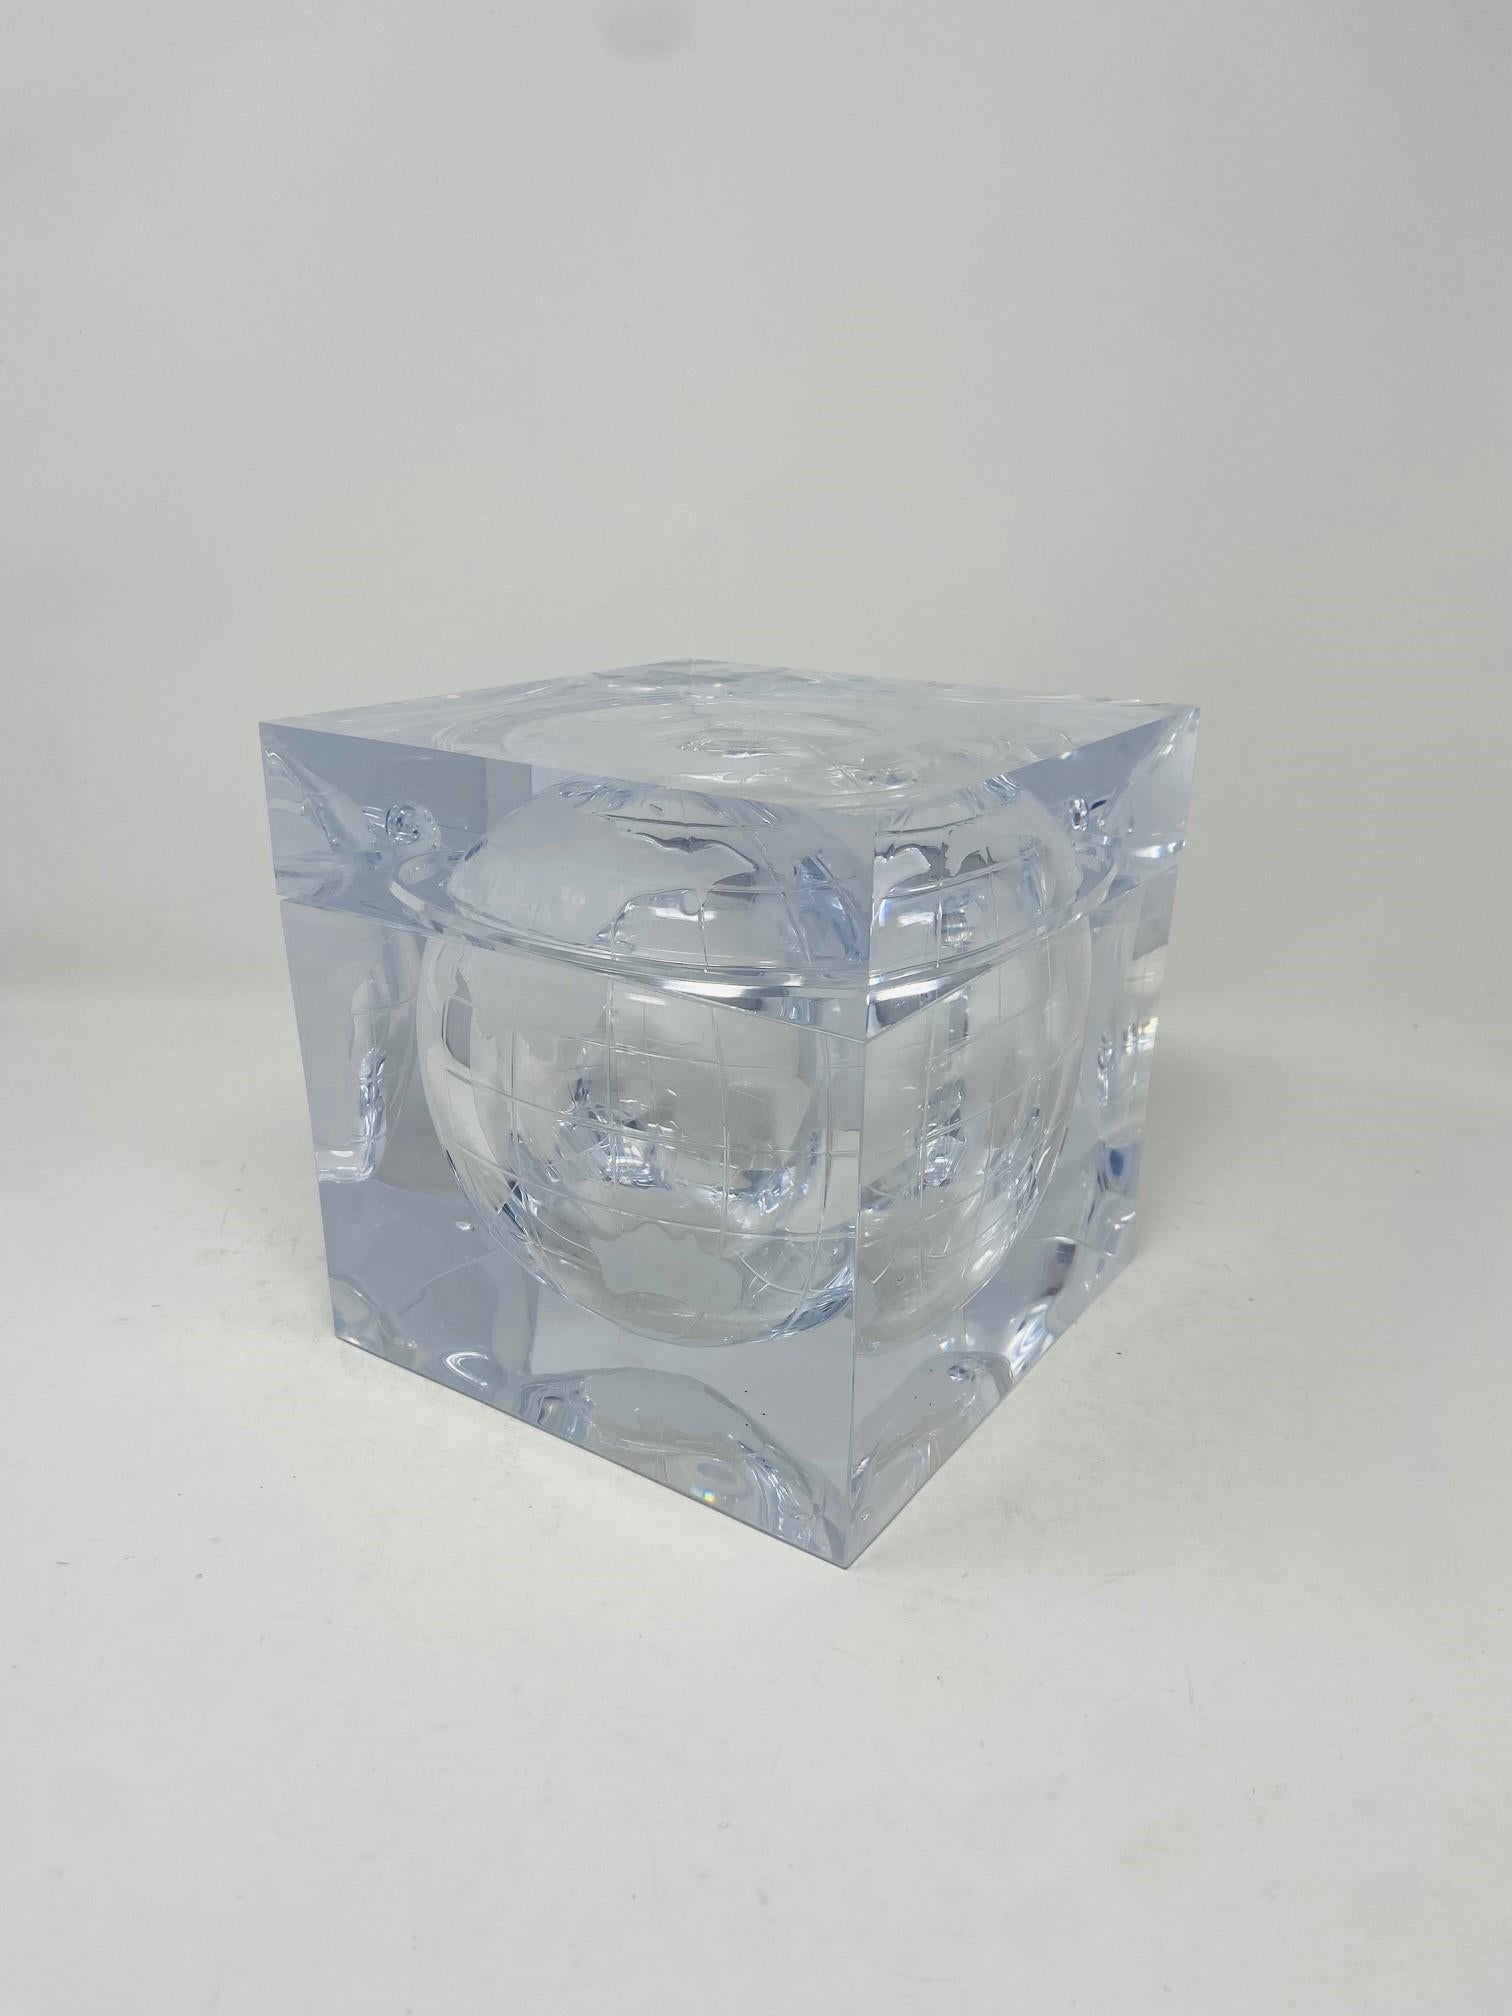 Italian Vintage Lucite World Globe Ice Bucket by Alessandro Albrizzi 1970s Italy For Sale